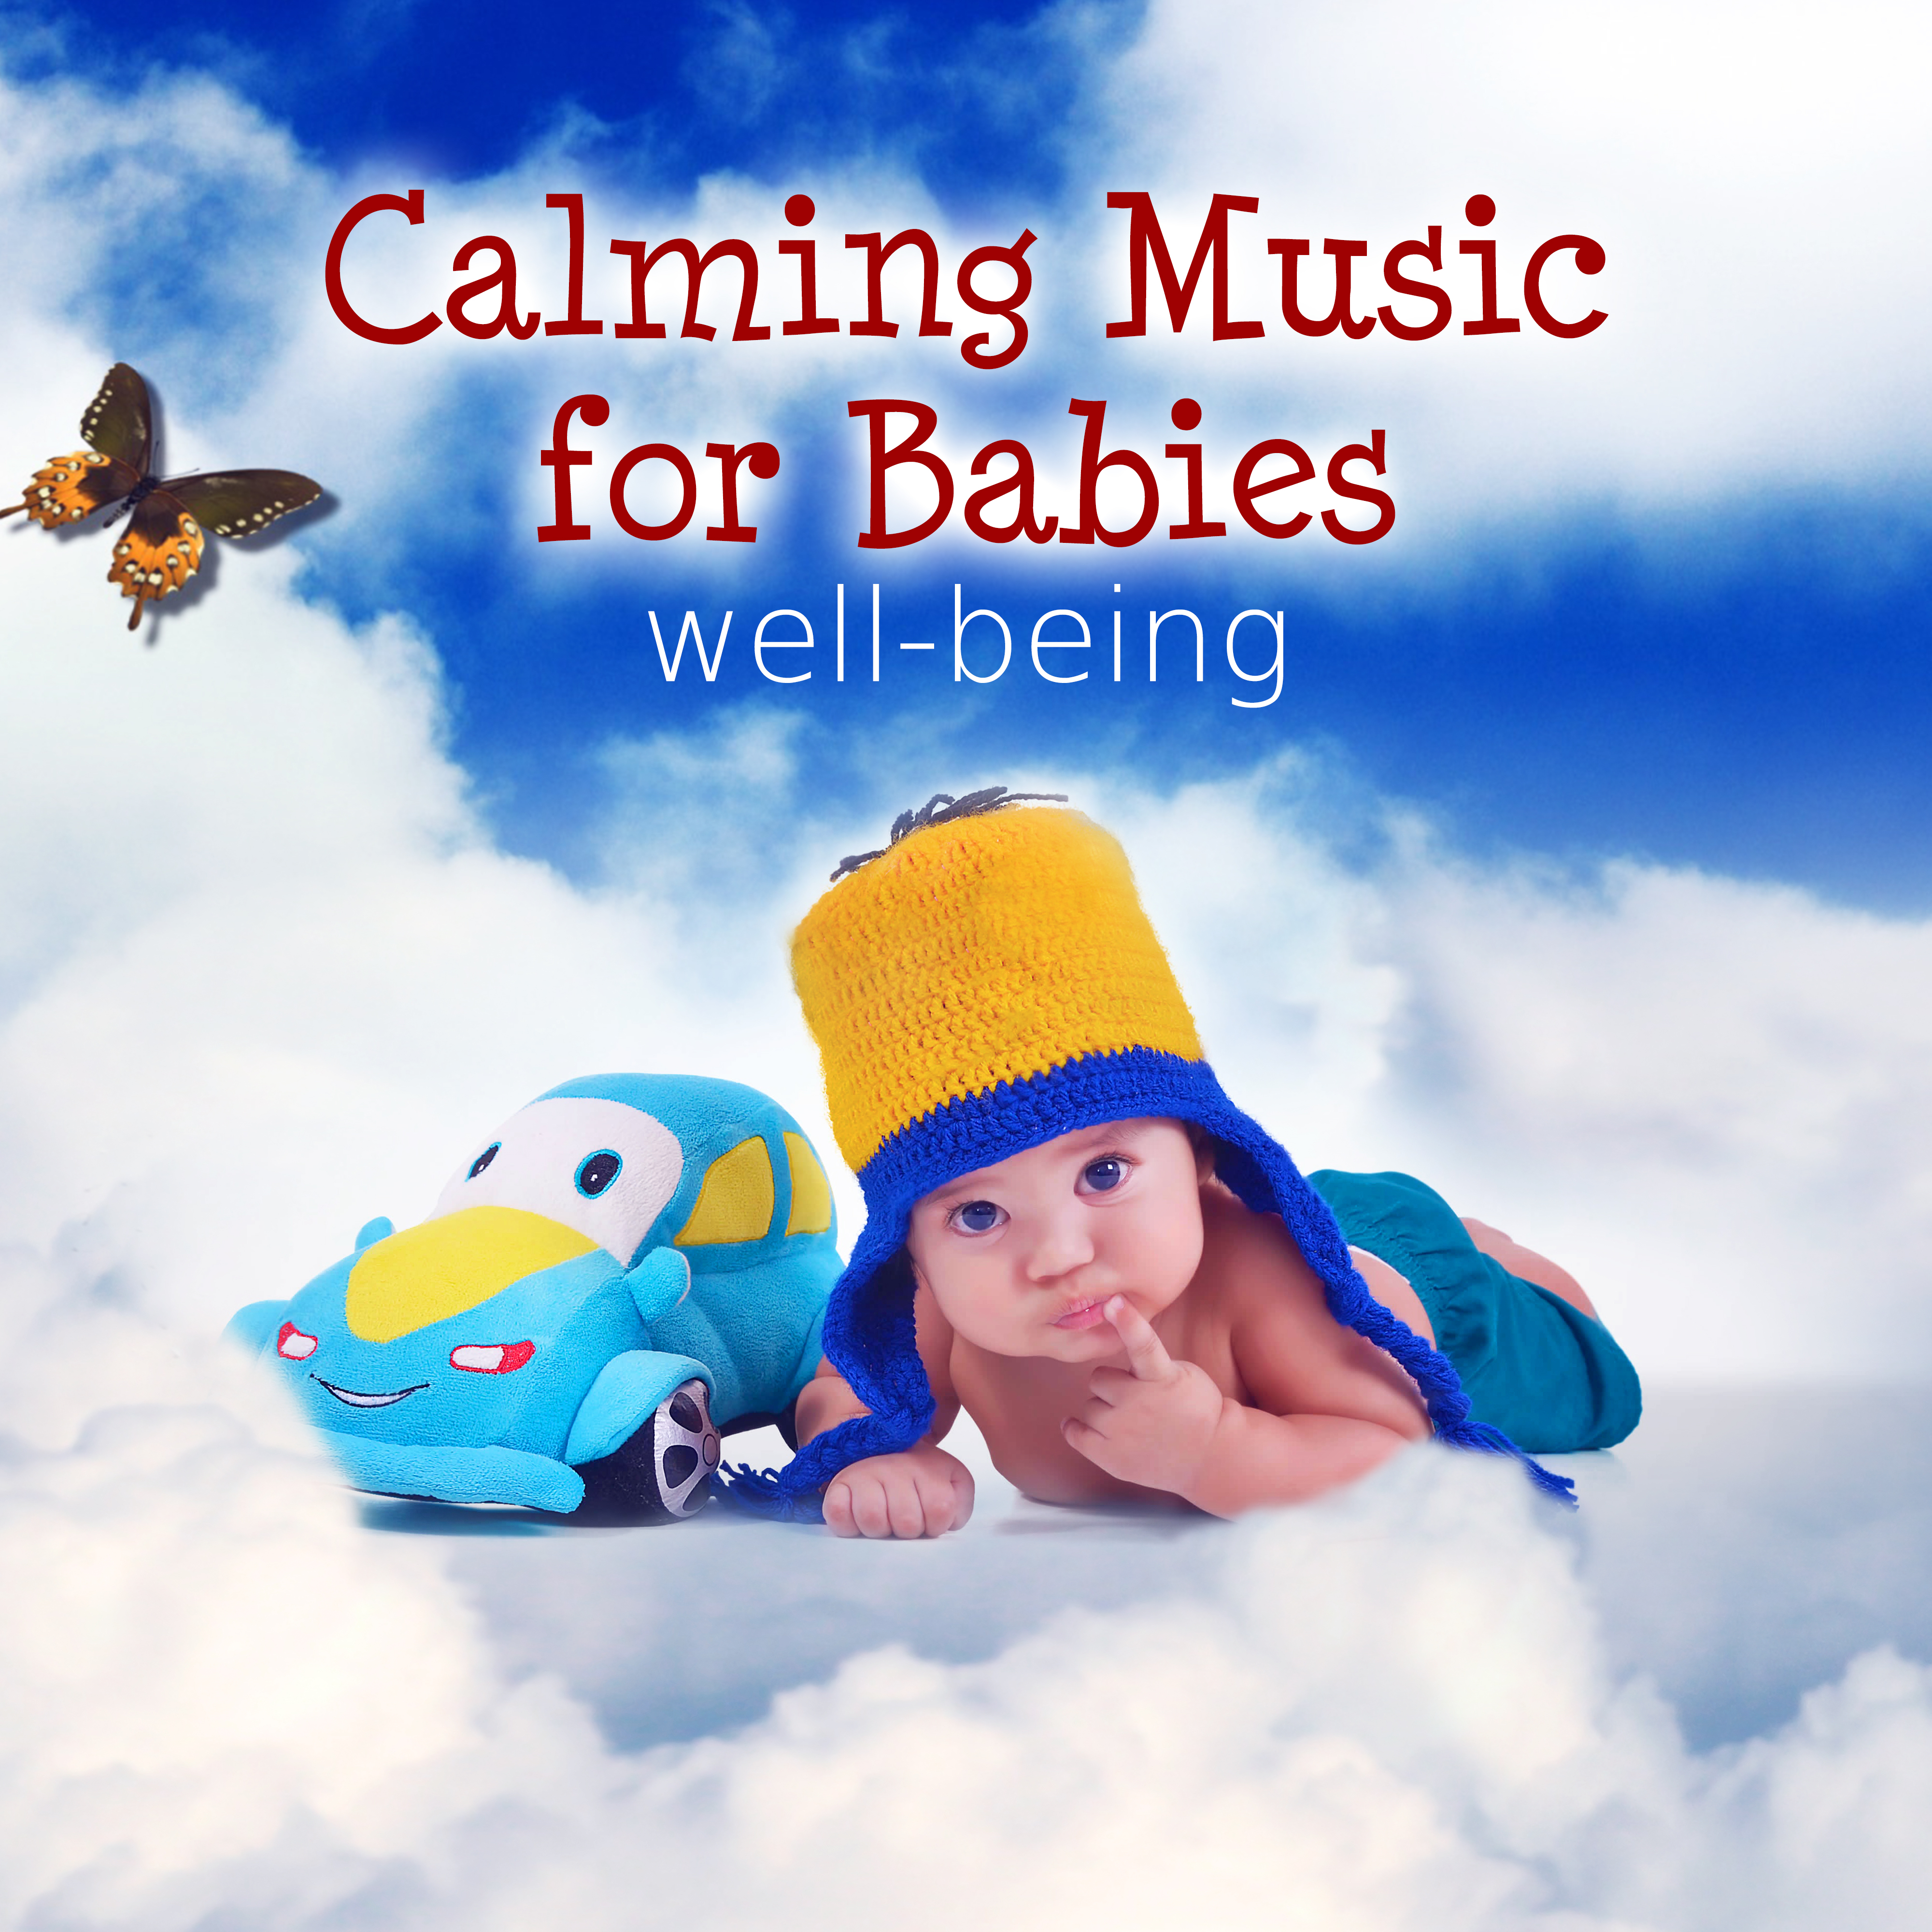 Calming Music for Babies: Relaxing Nature Sounds for Your Baby's Well-Being, White Noise, Singing Birds, Gentle Piano Lullabies and Music for Childrens